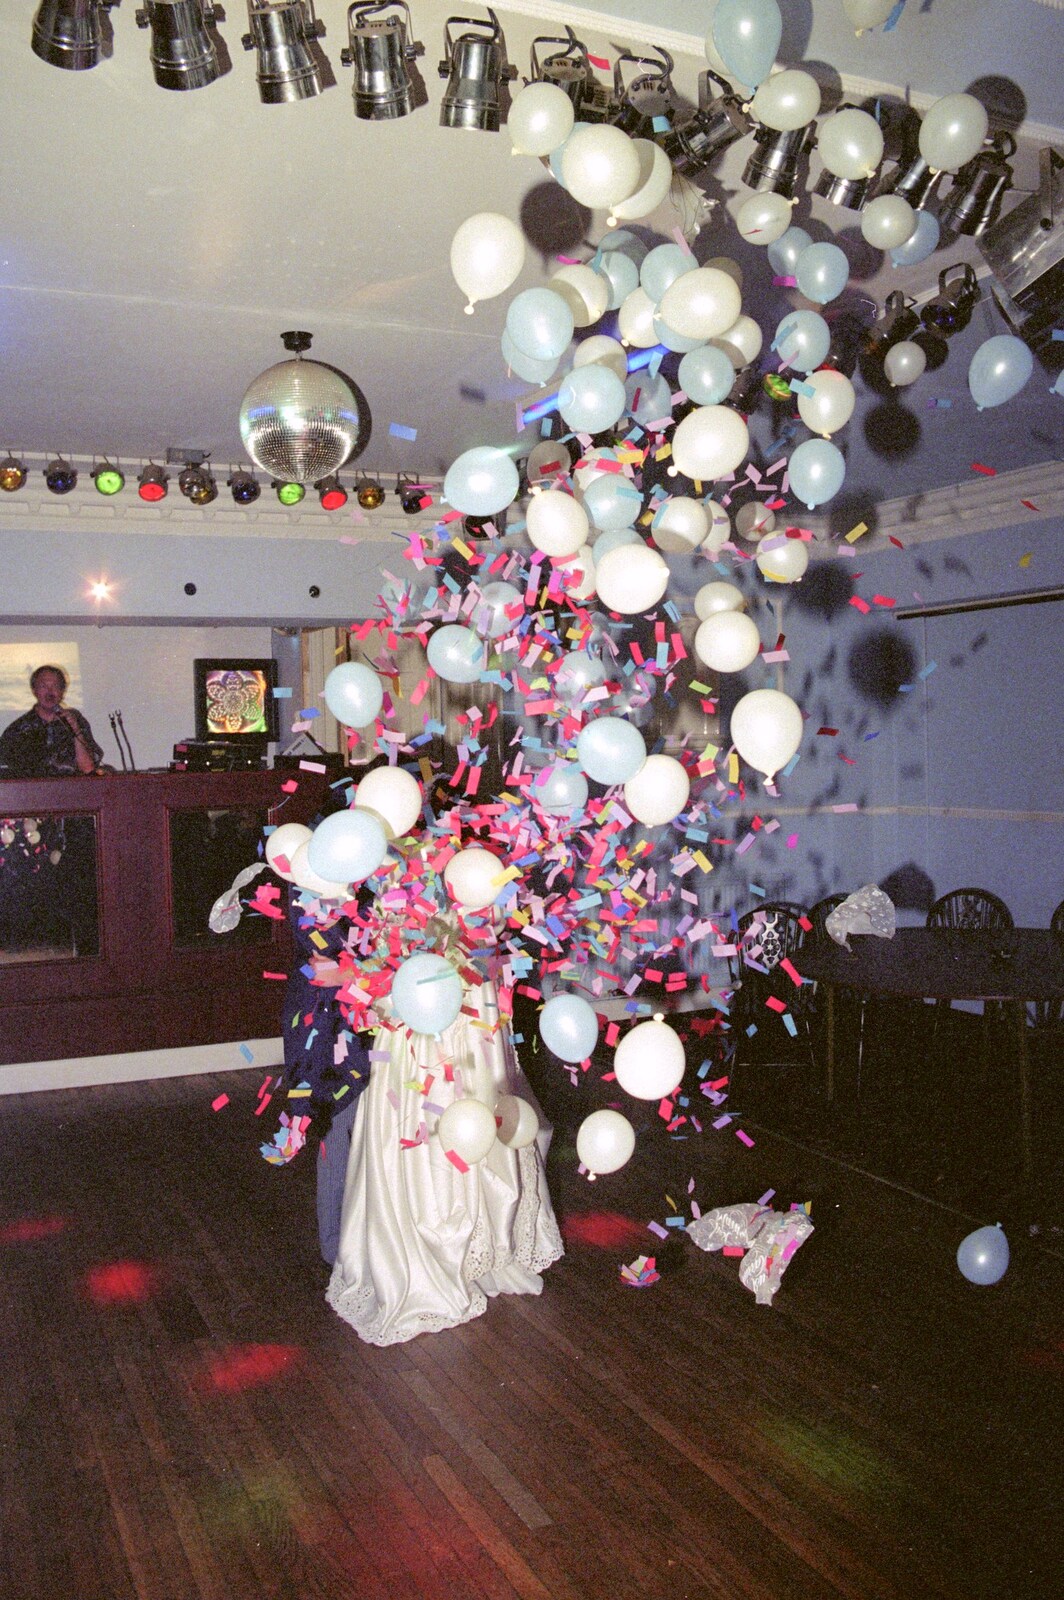 Riki's Wedding, Treboeth, Swansea - 7th May 1996: There's a bridesmaid somewhere in the mass of balloons